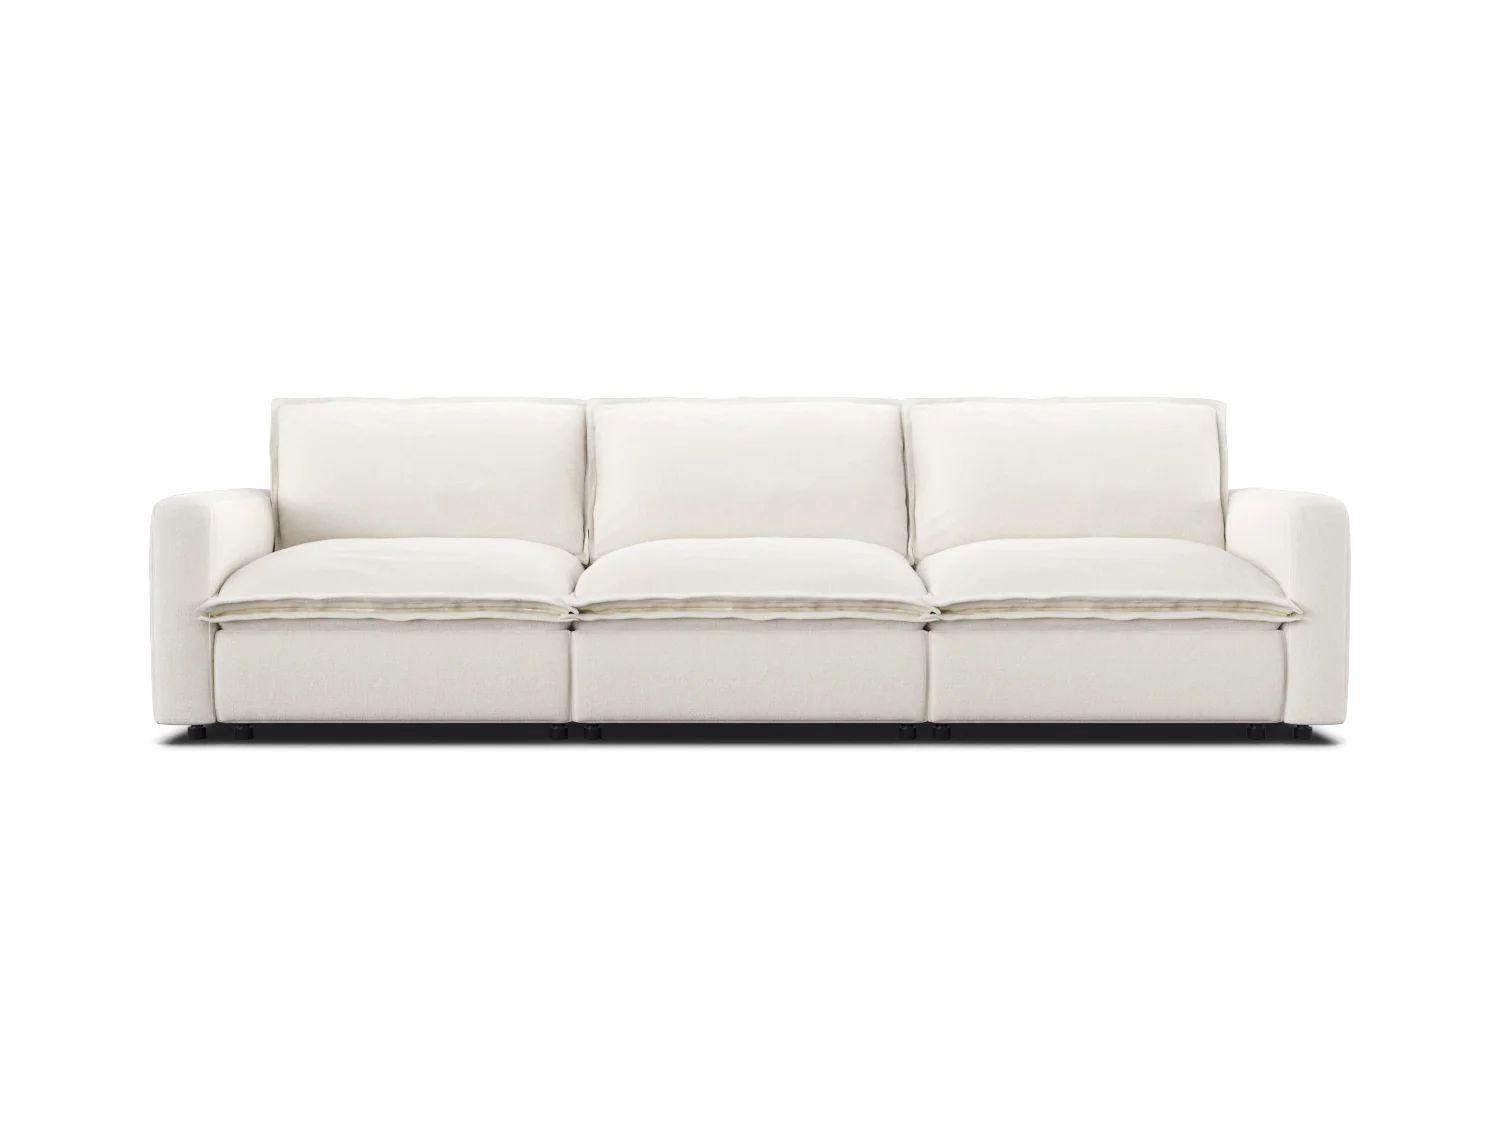 Homebody: Modular couches with comfort, recliner couches | Homebody